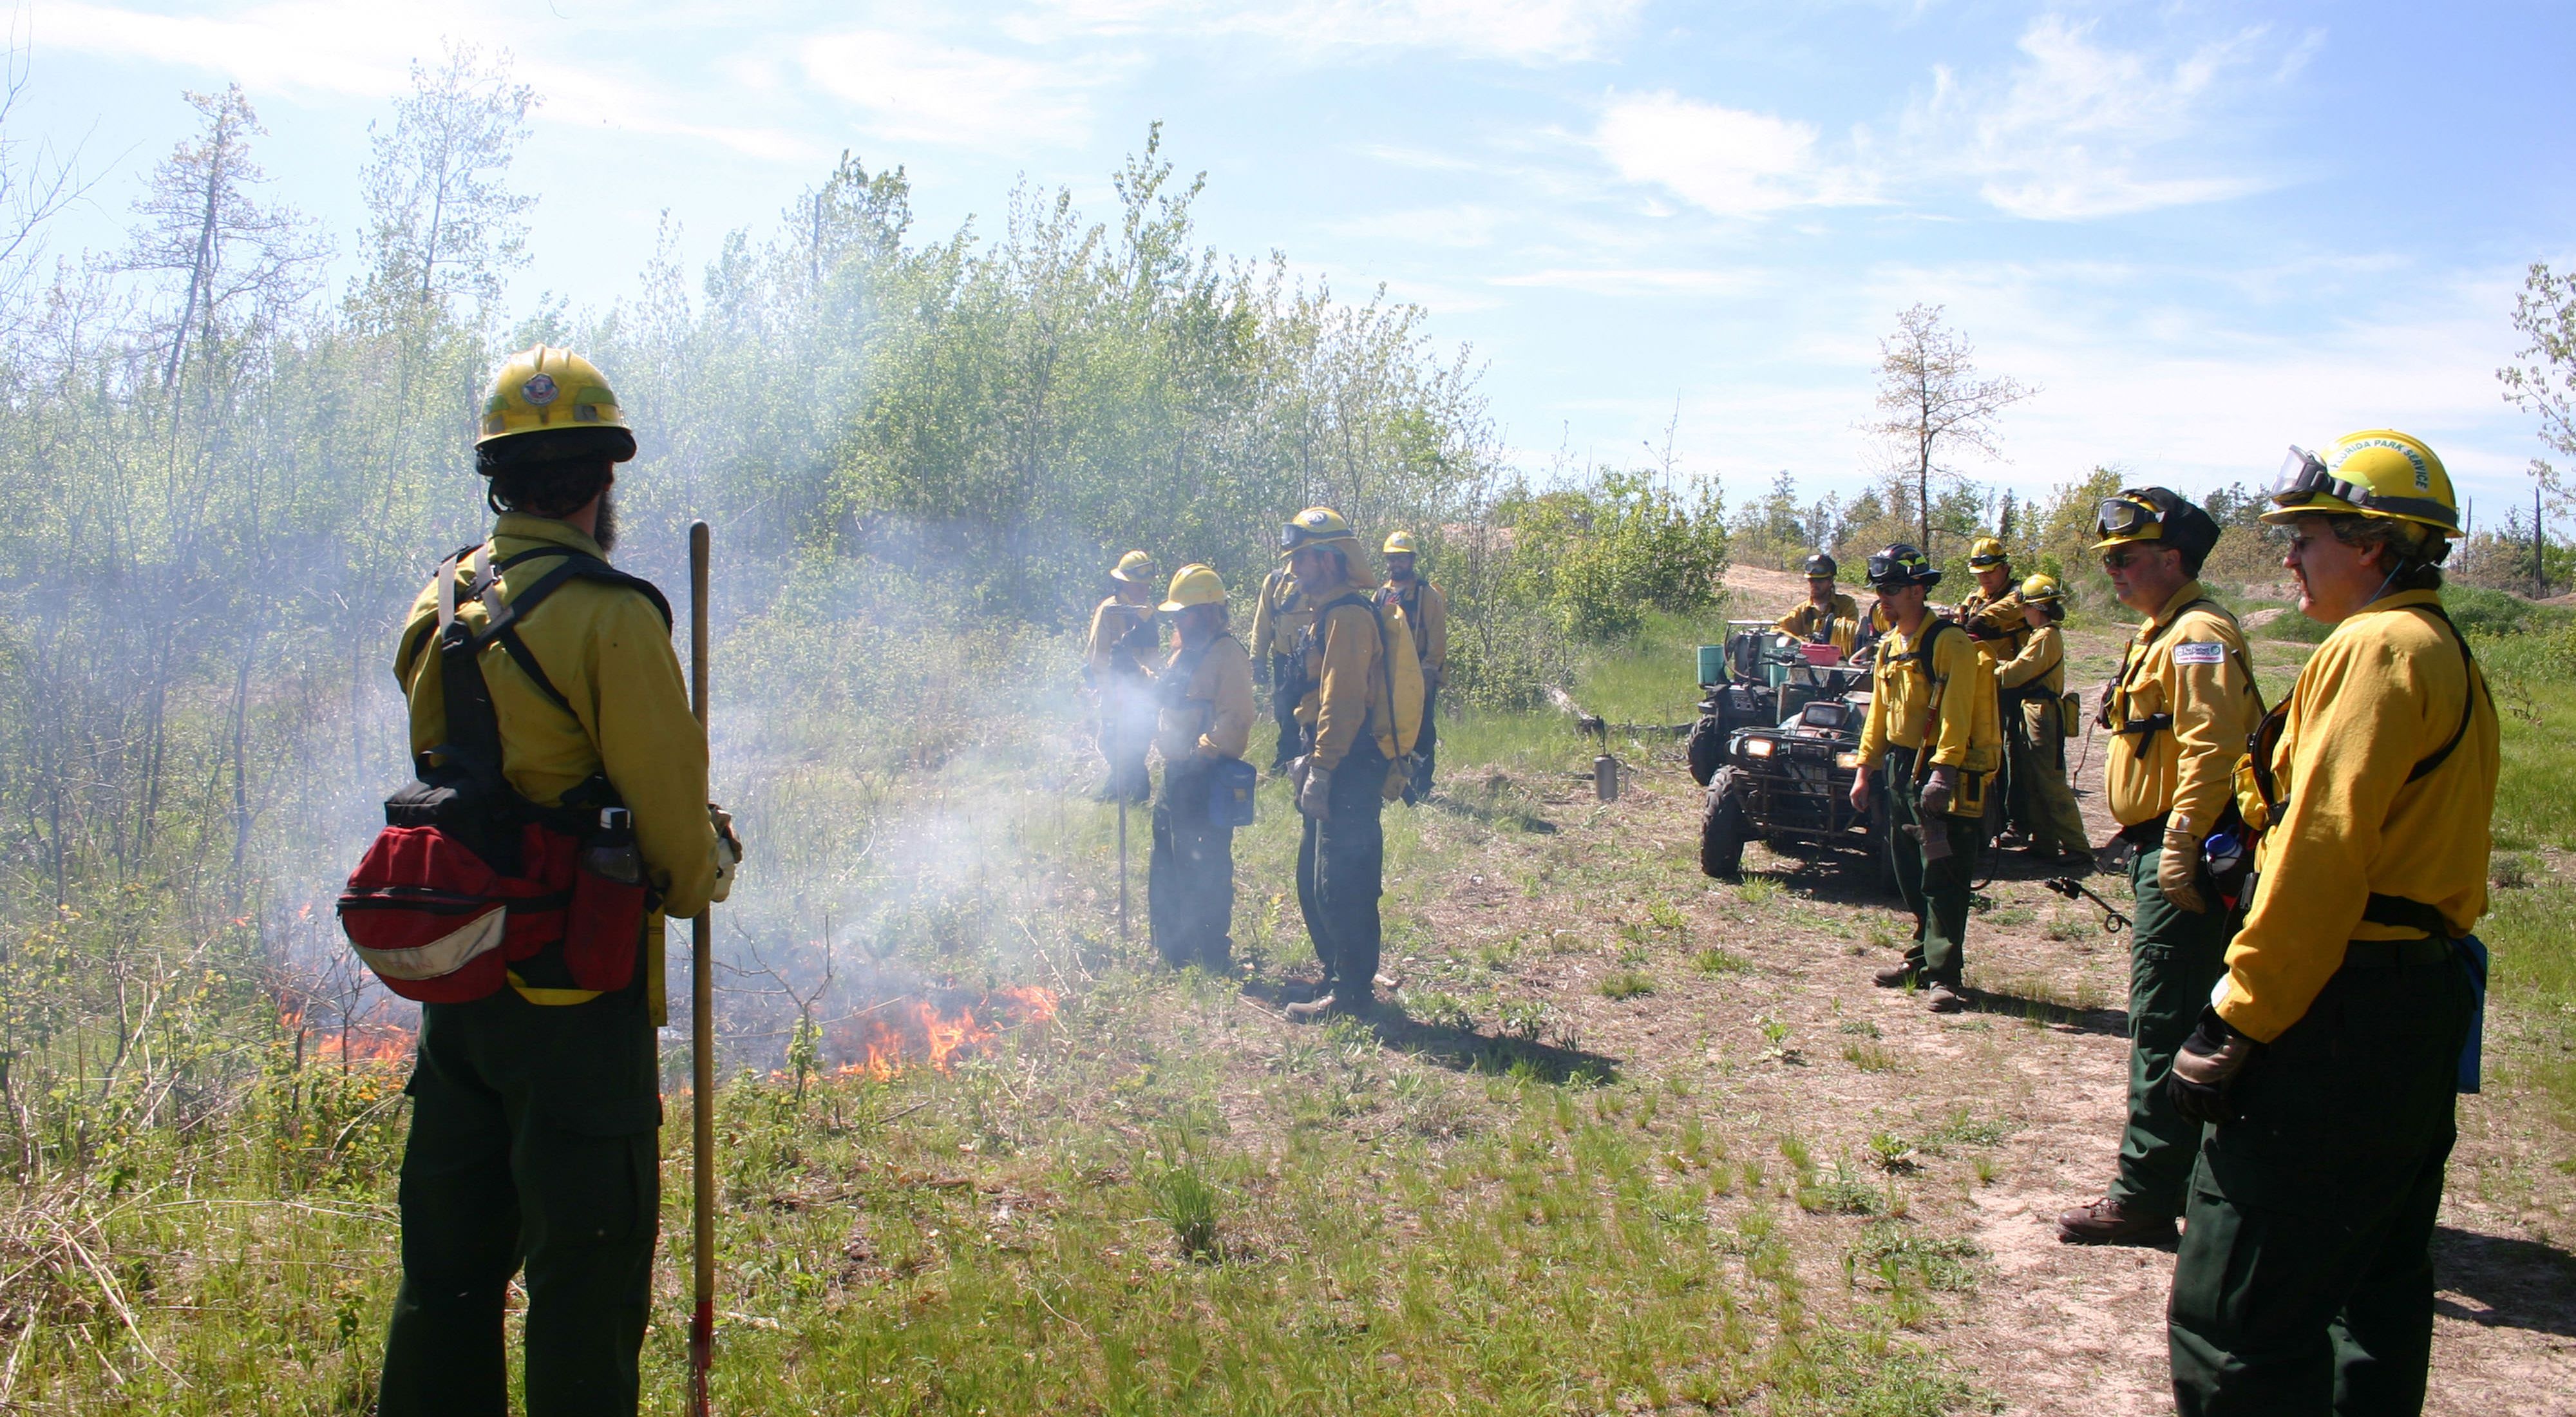 Fire crew members in protective gear stand on a train and observe burning brush.